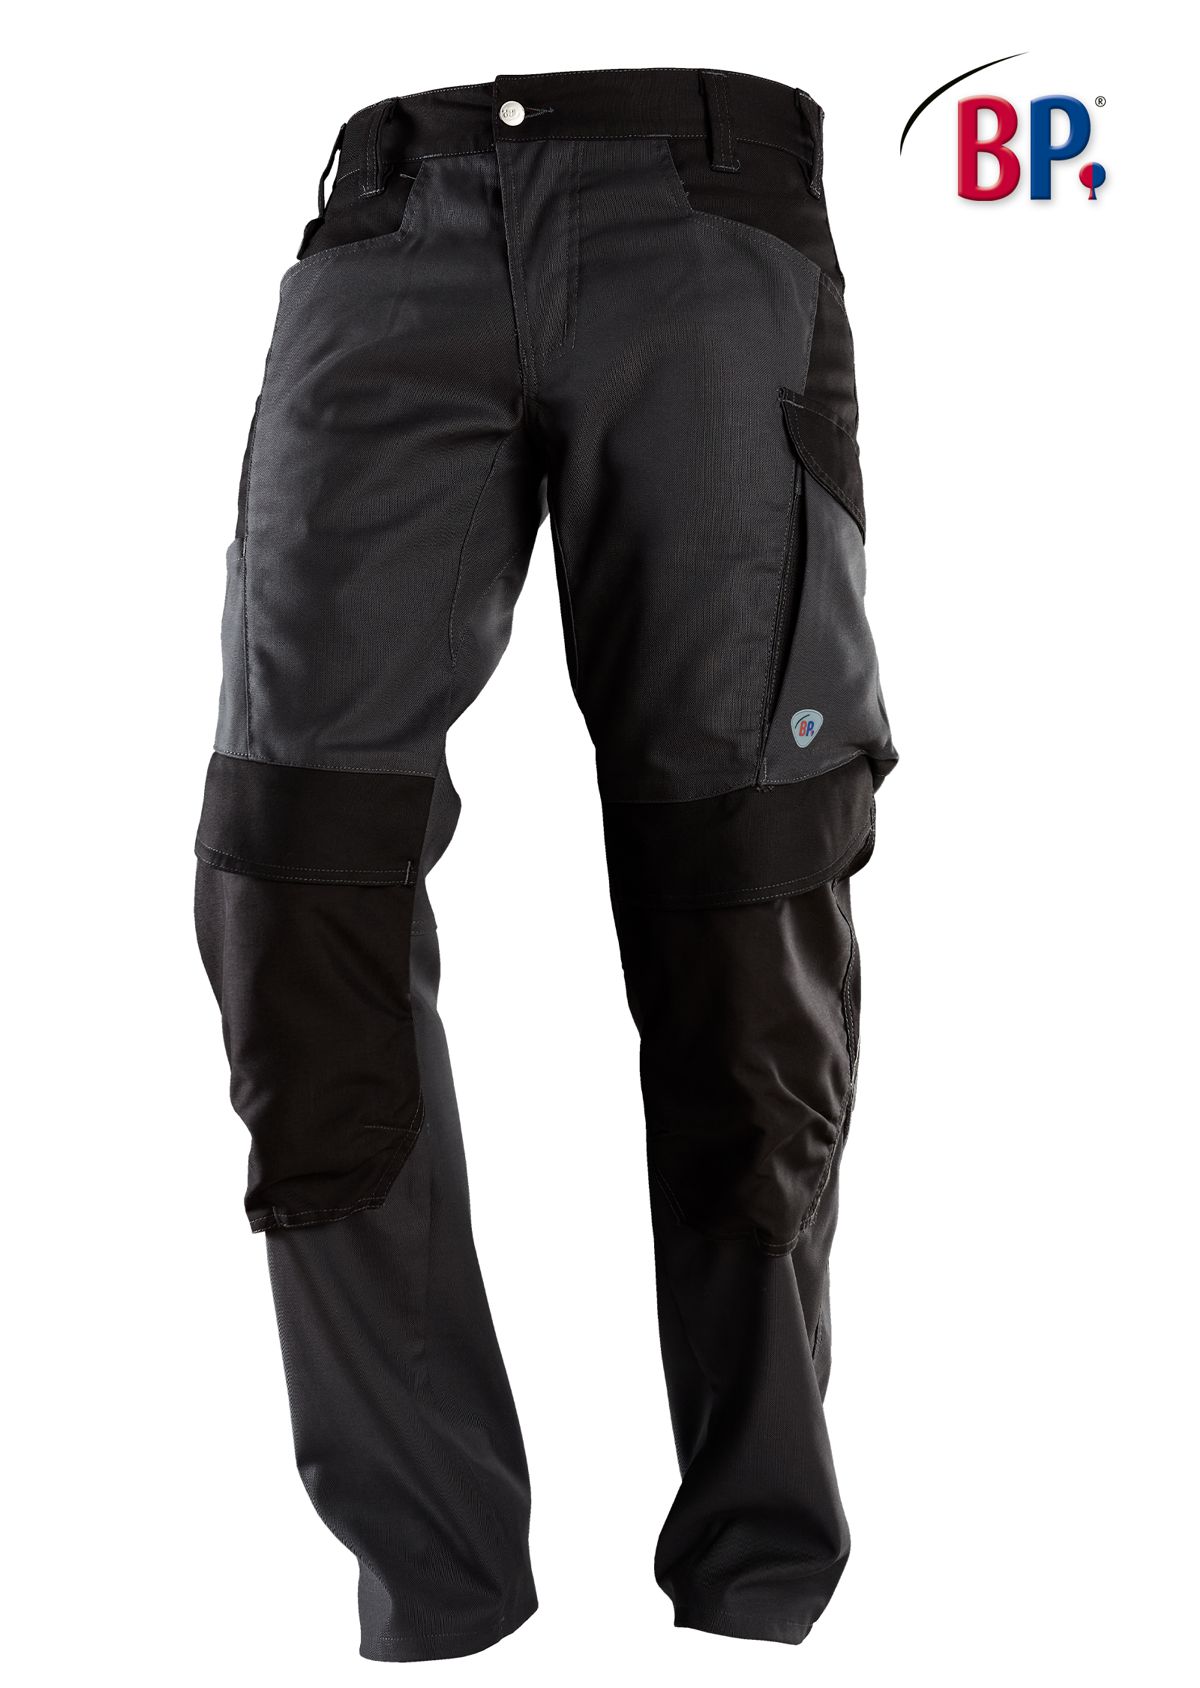 BP® Robust work trousers with knee pad pockets